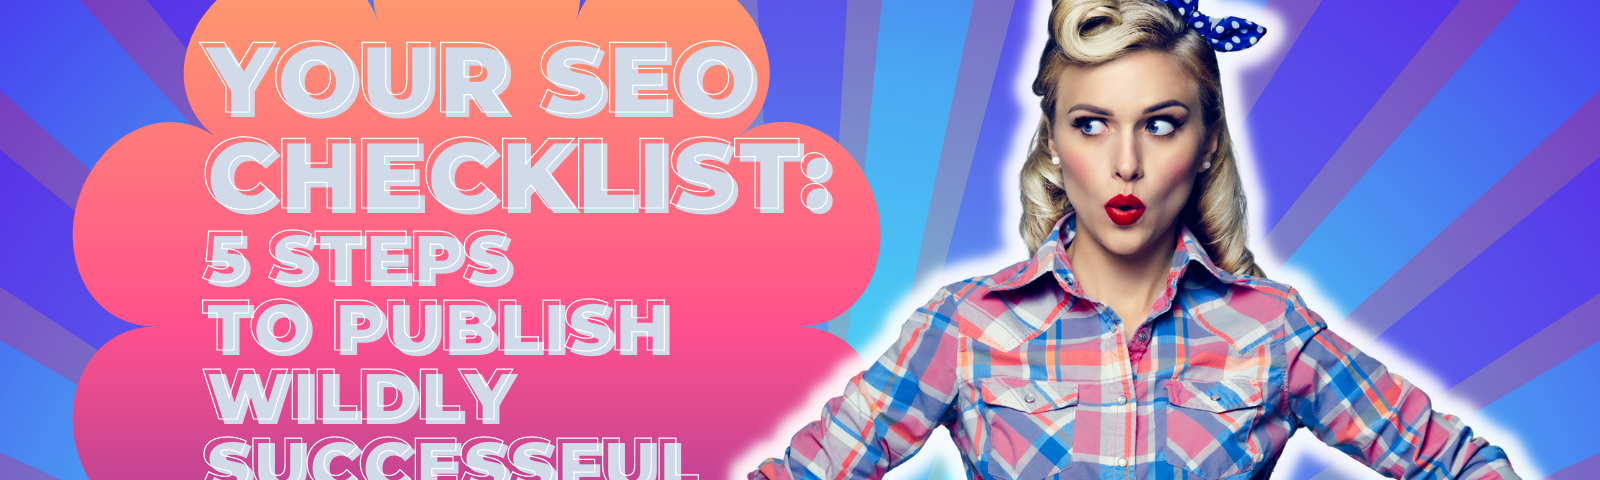 Your SEO Checklist: 5 Steps to Publish Wildly Successful Blog Posts on Medium